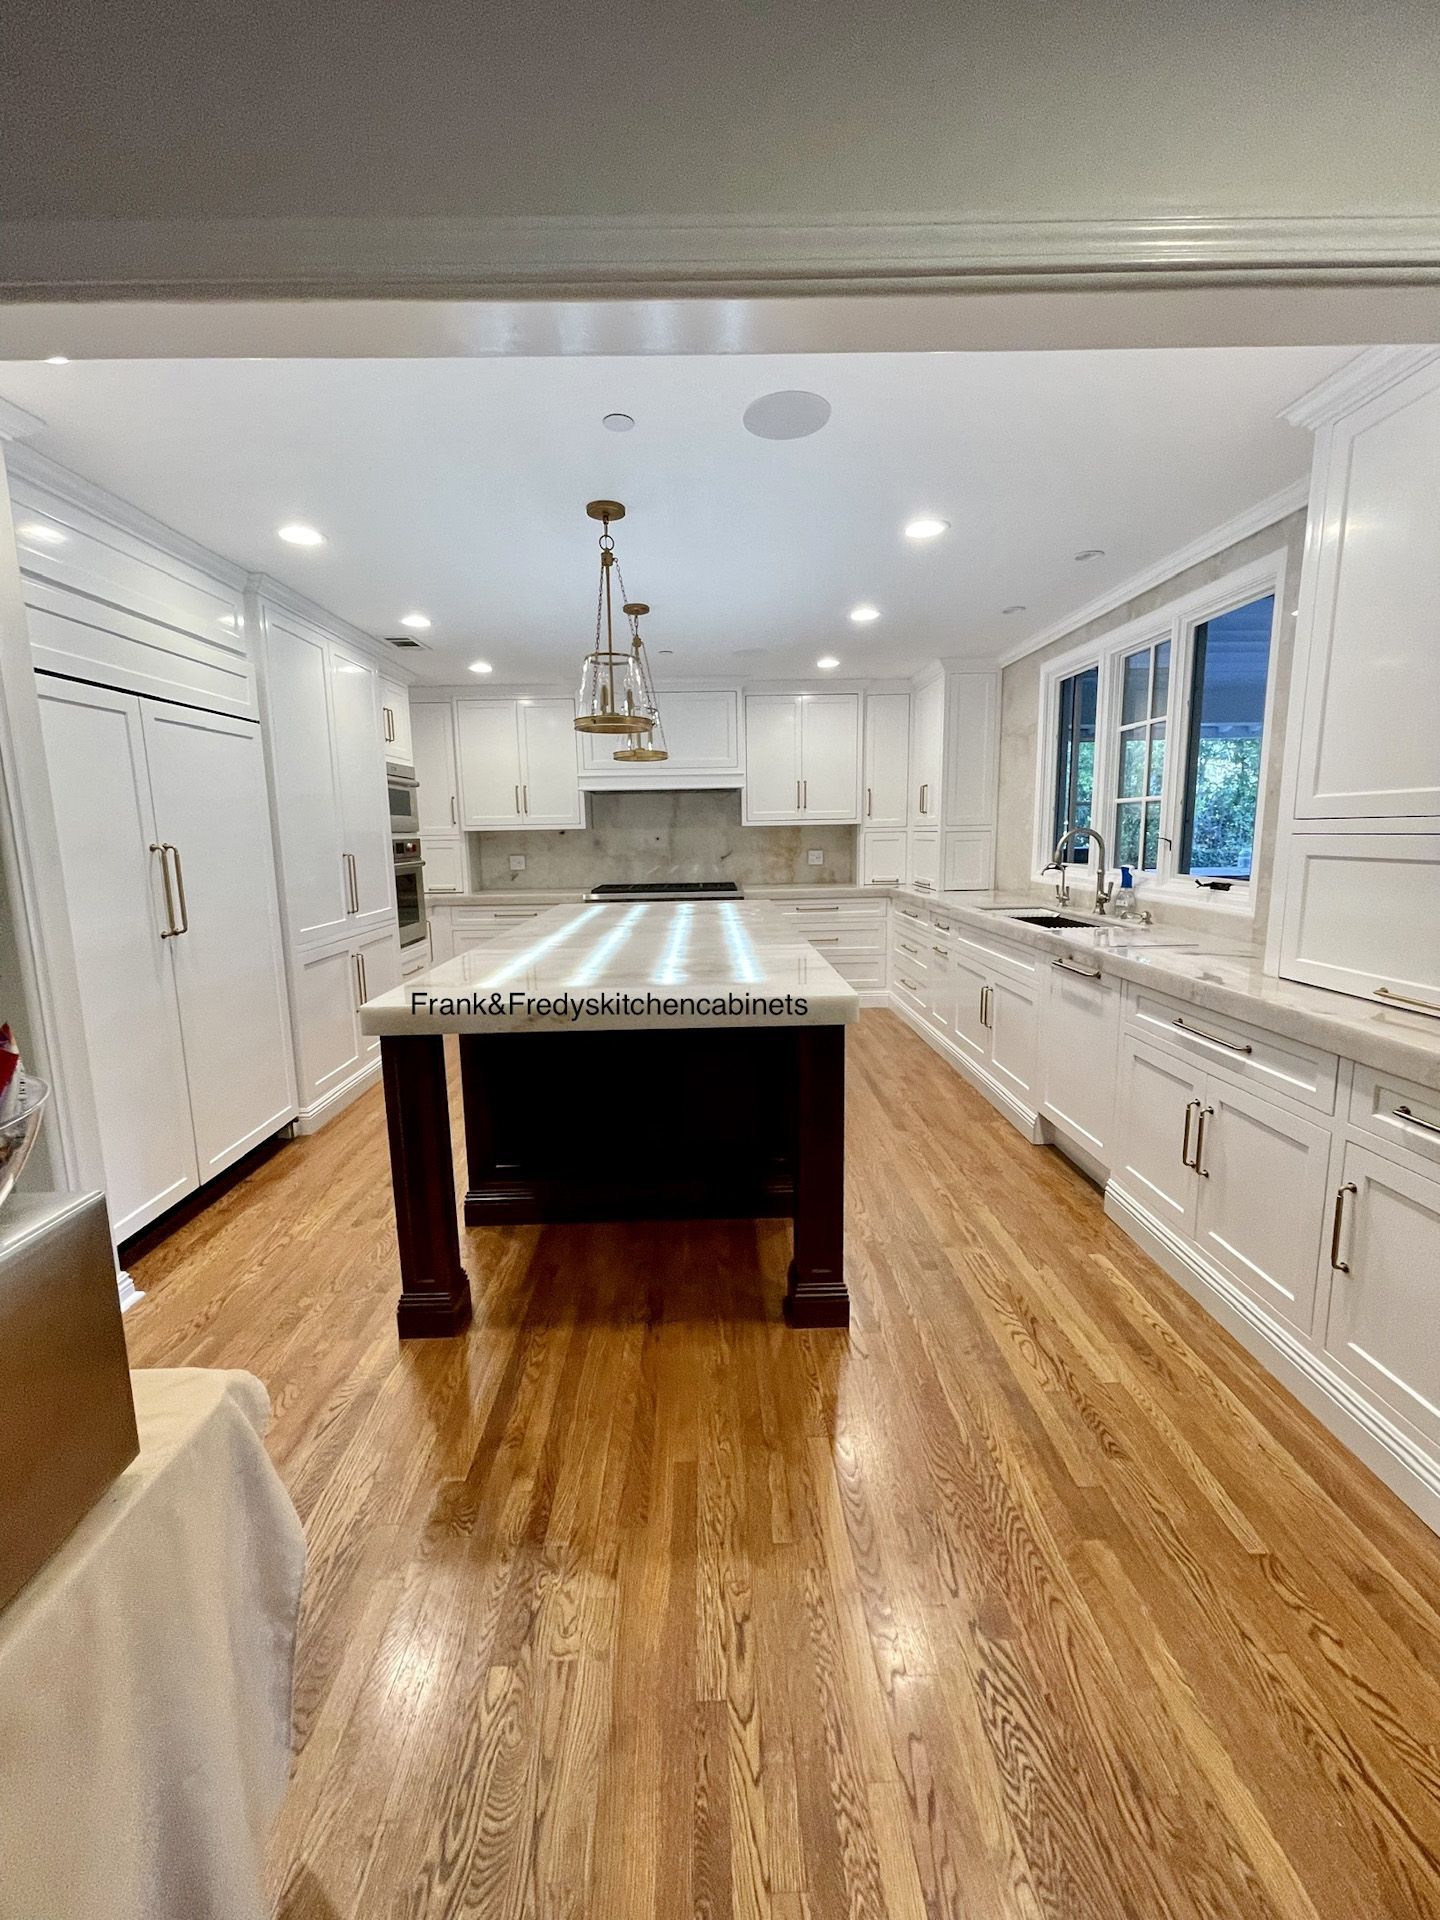 A kitchen with a large island in the middle and hardwood floors.